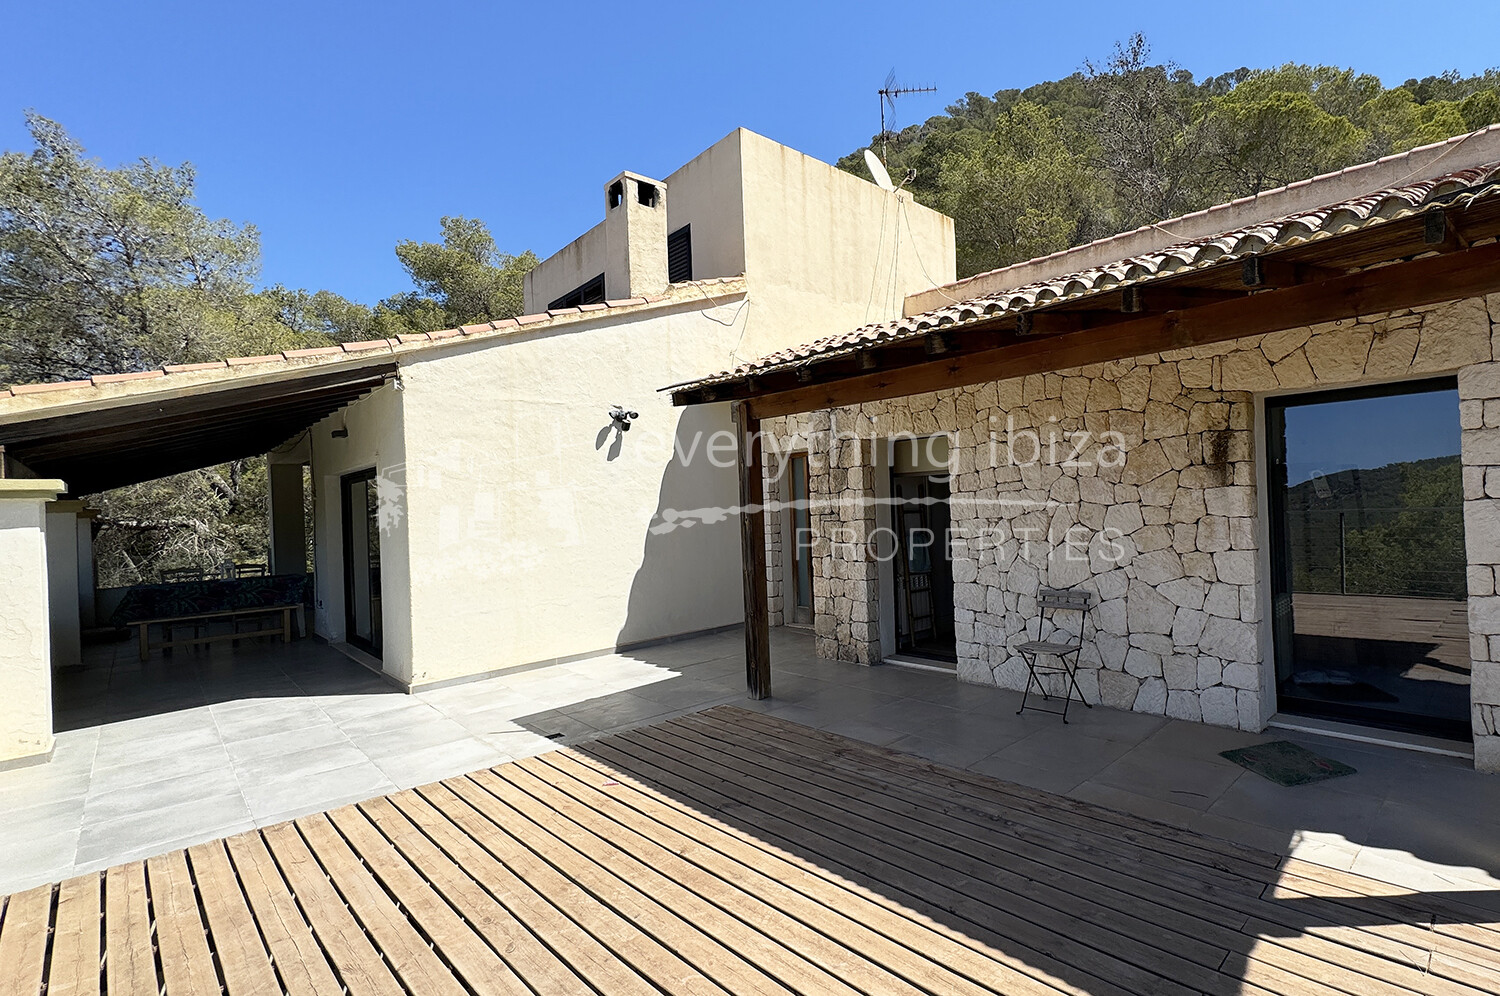 Charming Detached Country Villa Close to the Village of Sant Josep, ref. 1726, for sale in Ibiza by everything ibiza Properties